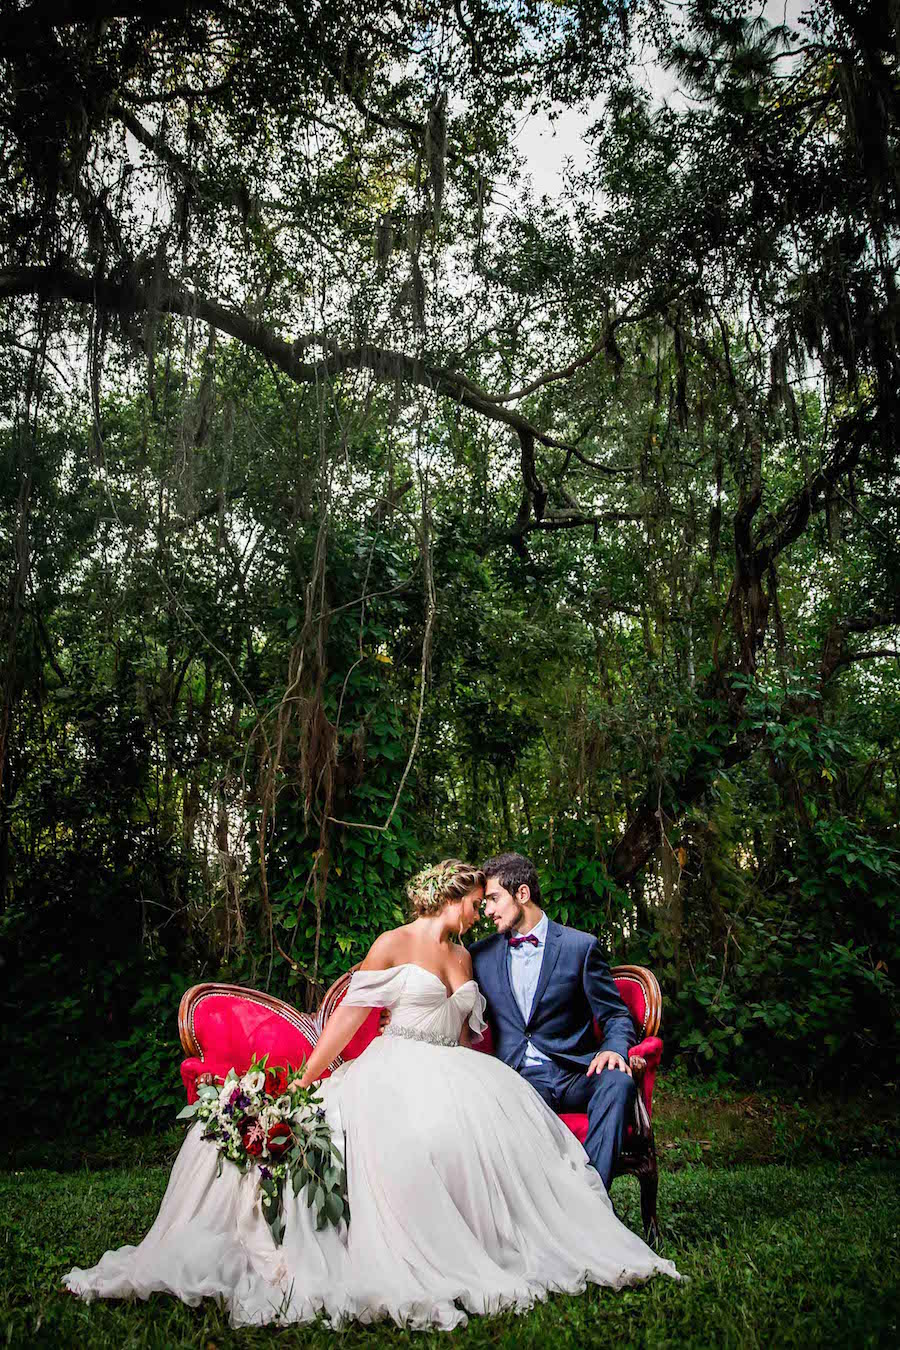 Bride in Amsale Wedding Dress from Blush Bridal Sarasota with Deep Red Burgundy Wedding Bouquet with Greenery on Red Vintage Couch Chaise | Southern Inspired Outdoor Wedding Reception Decor Styled Shoot